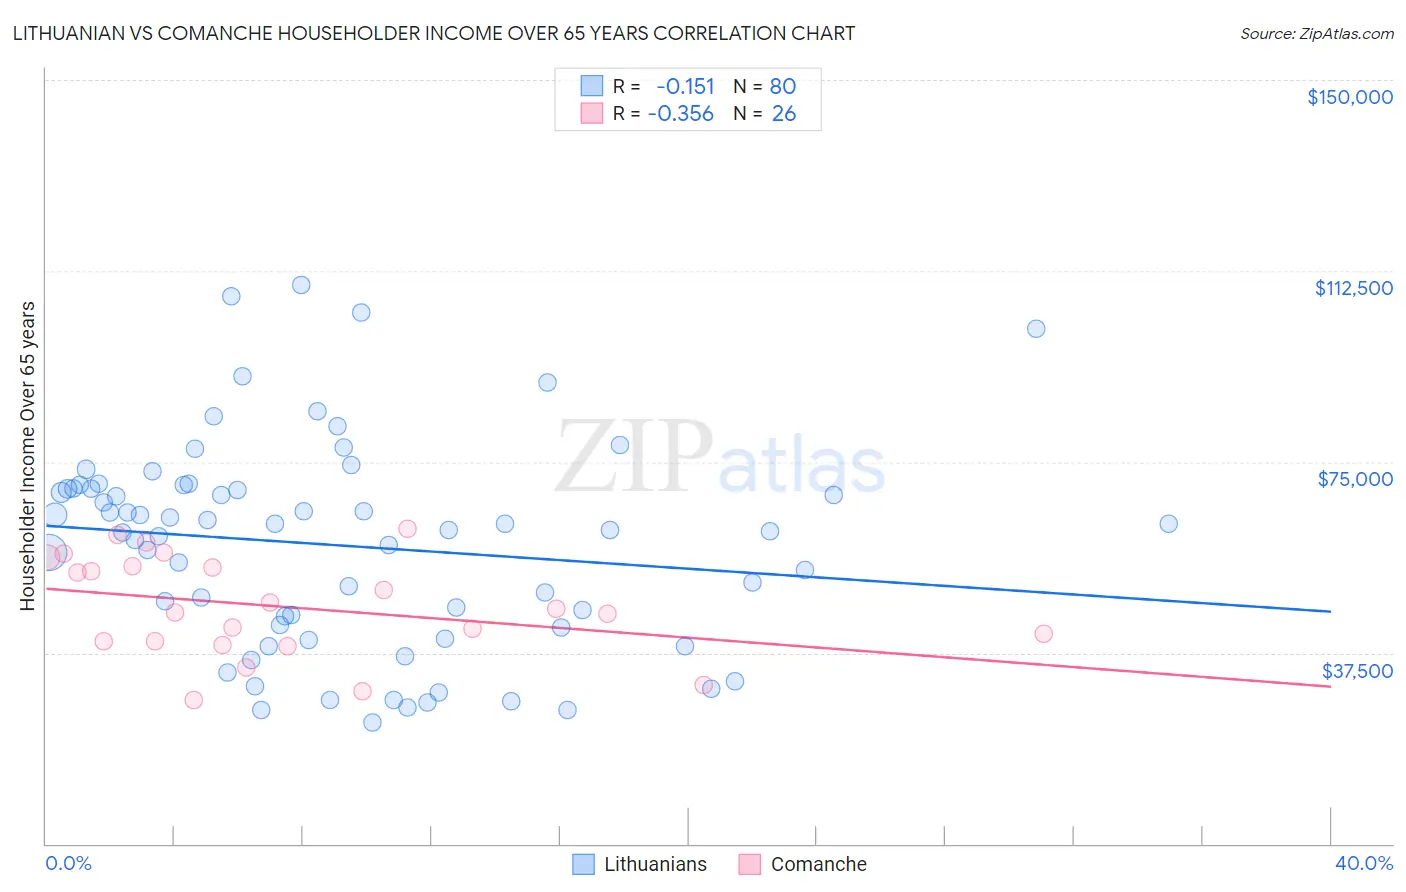 Lithuanian vs Comanche Householder Income Over 65 years